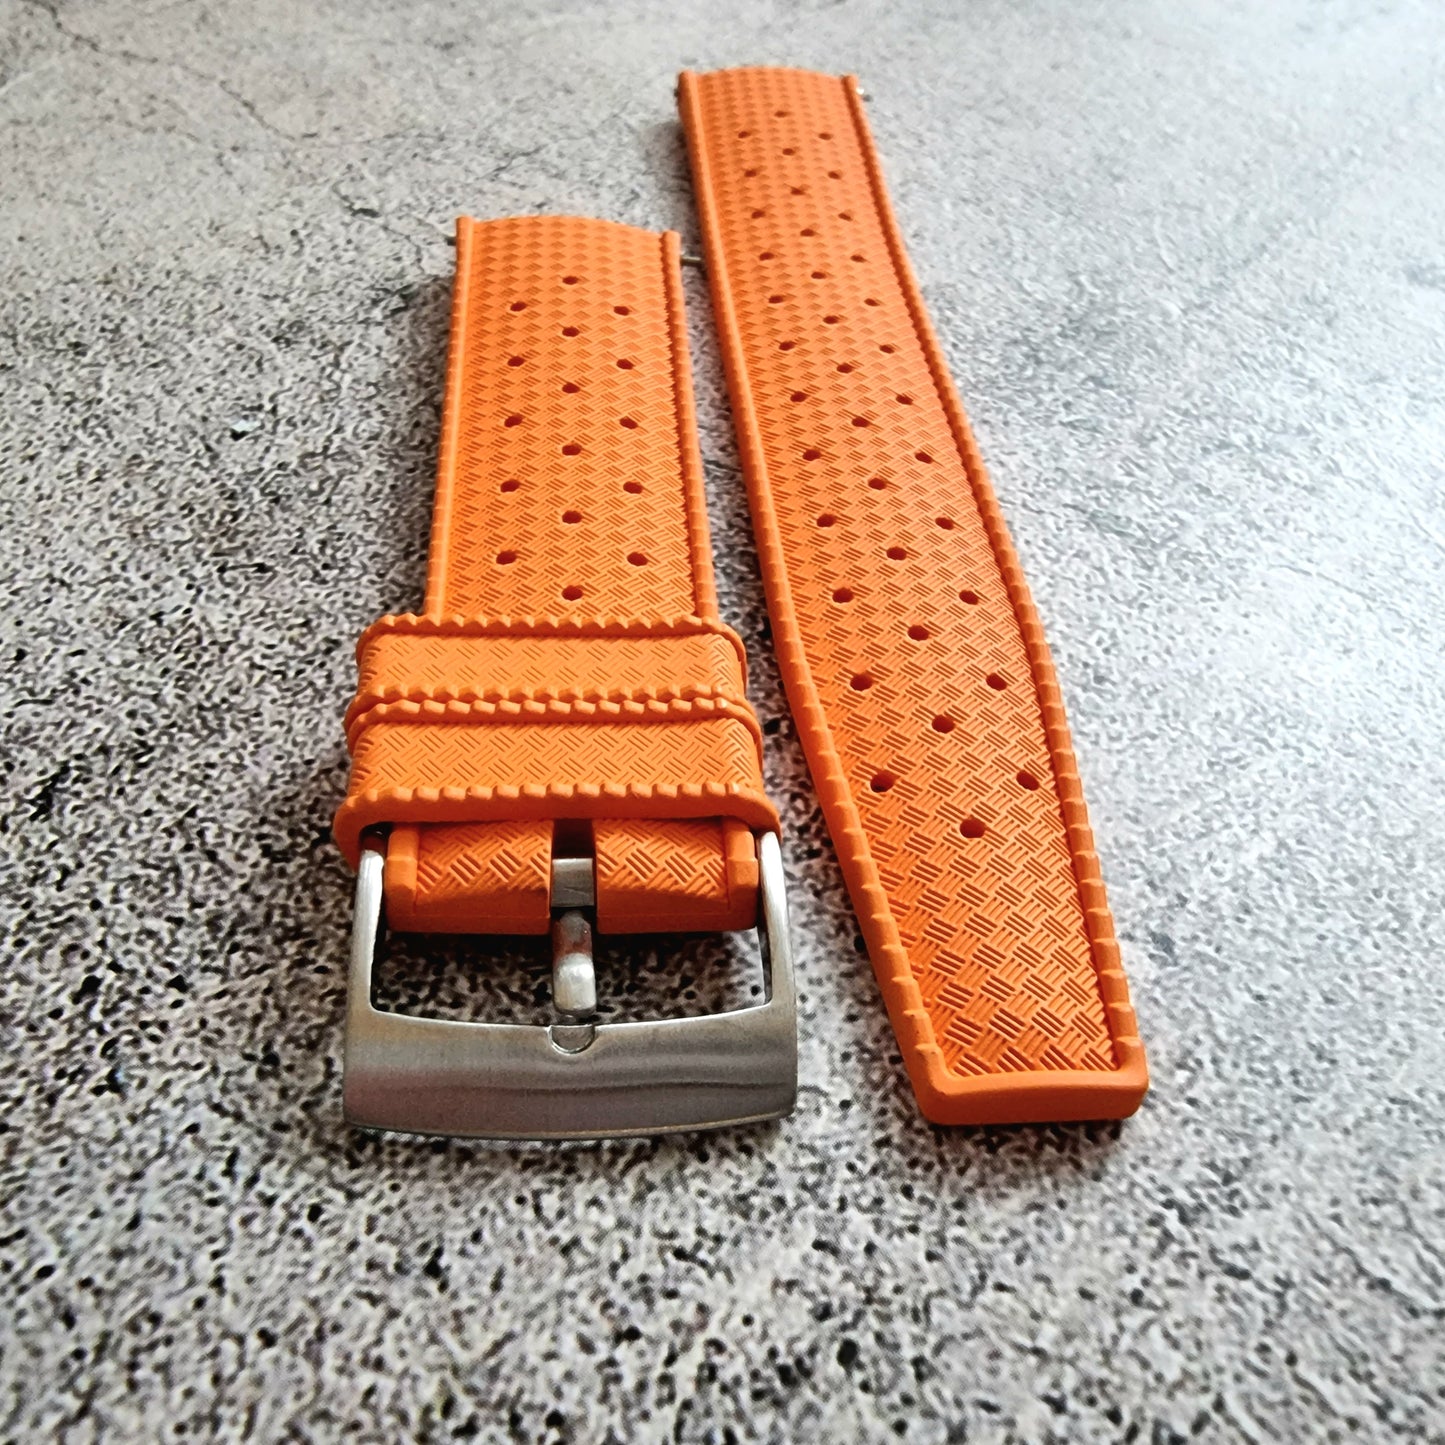 FKM Rubber Tropical Divers High Quality Watch Strap Band 18mm 20mm 22mm Orange